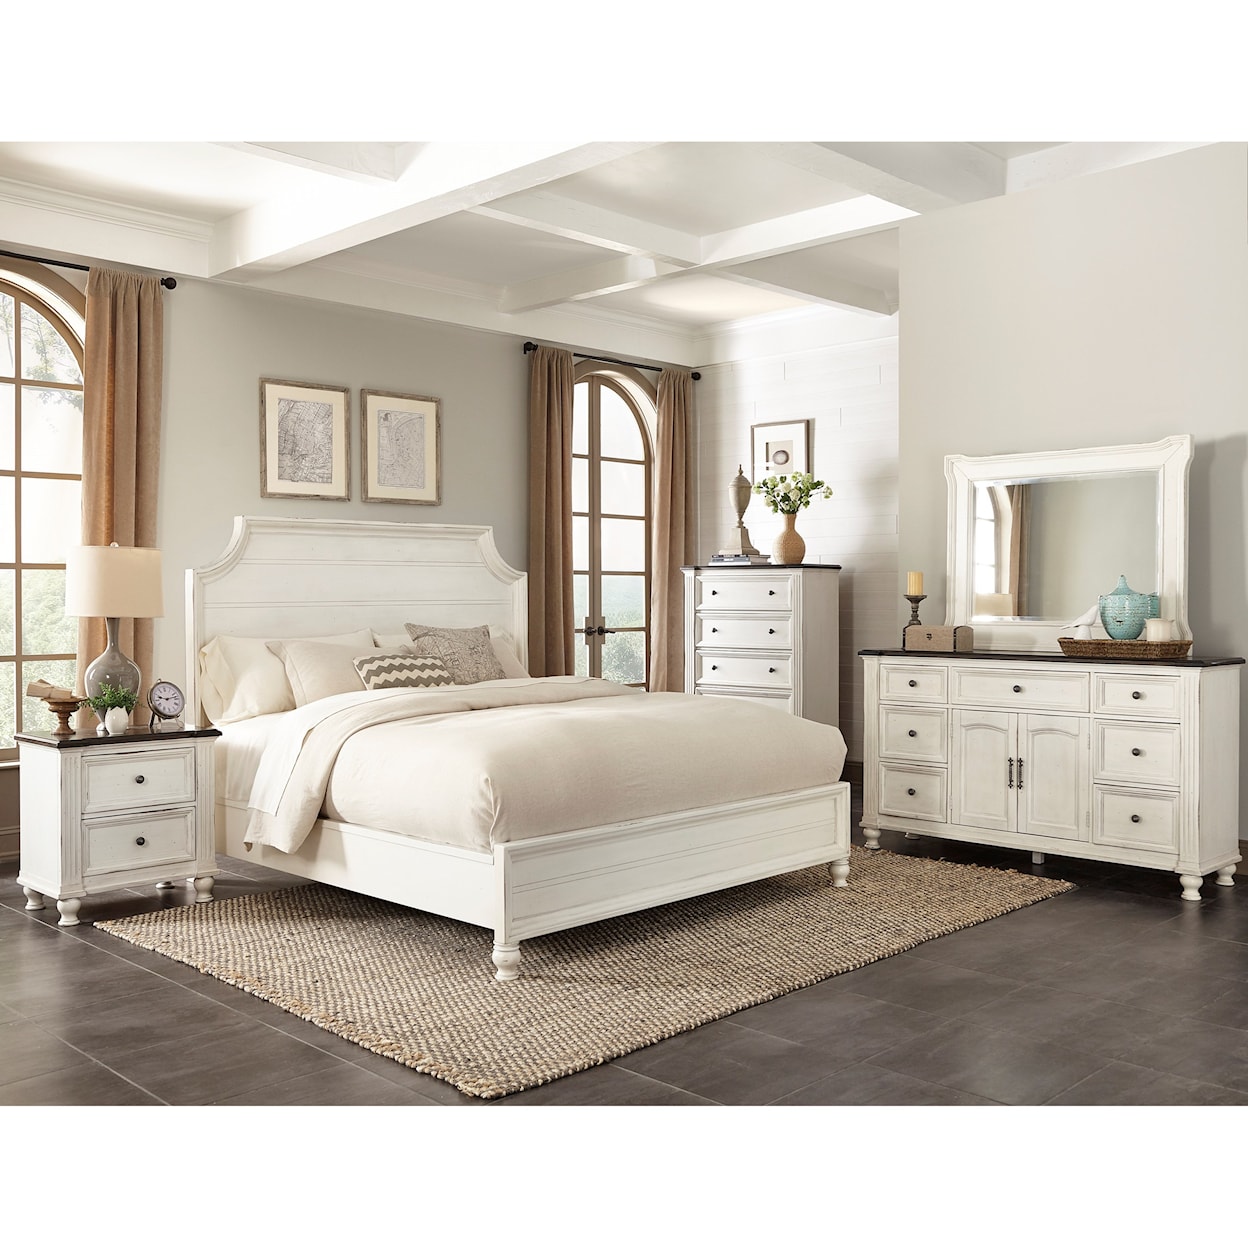 Sunny Designs Carriage House Bedroom Groups